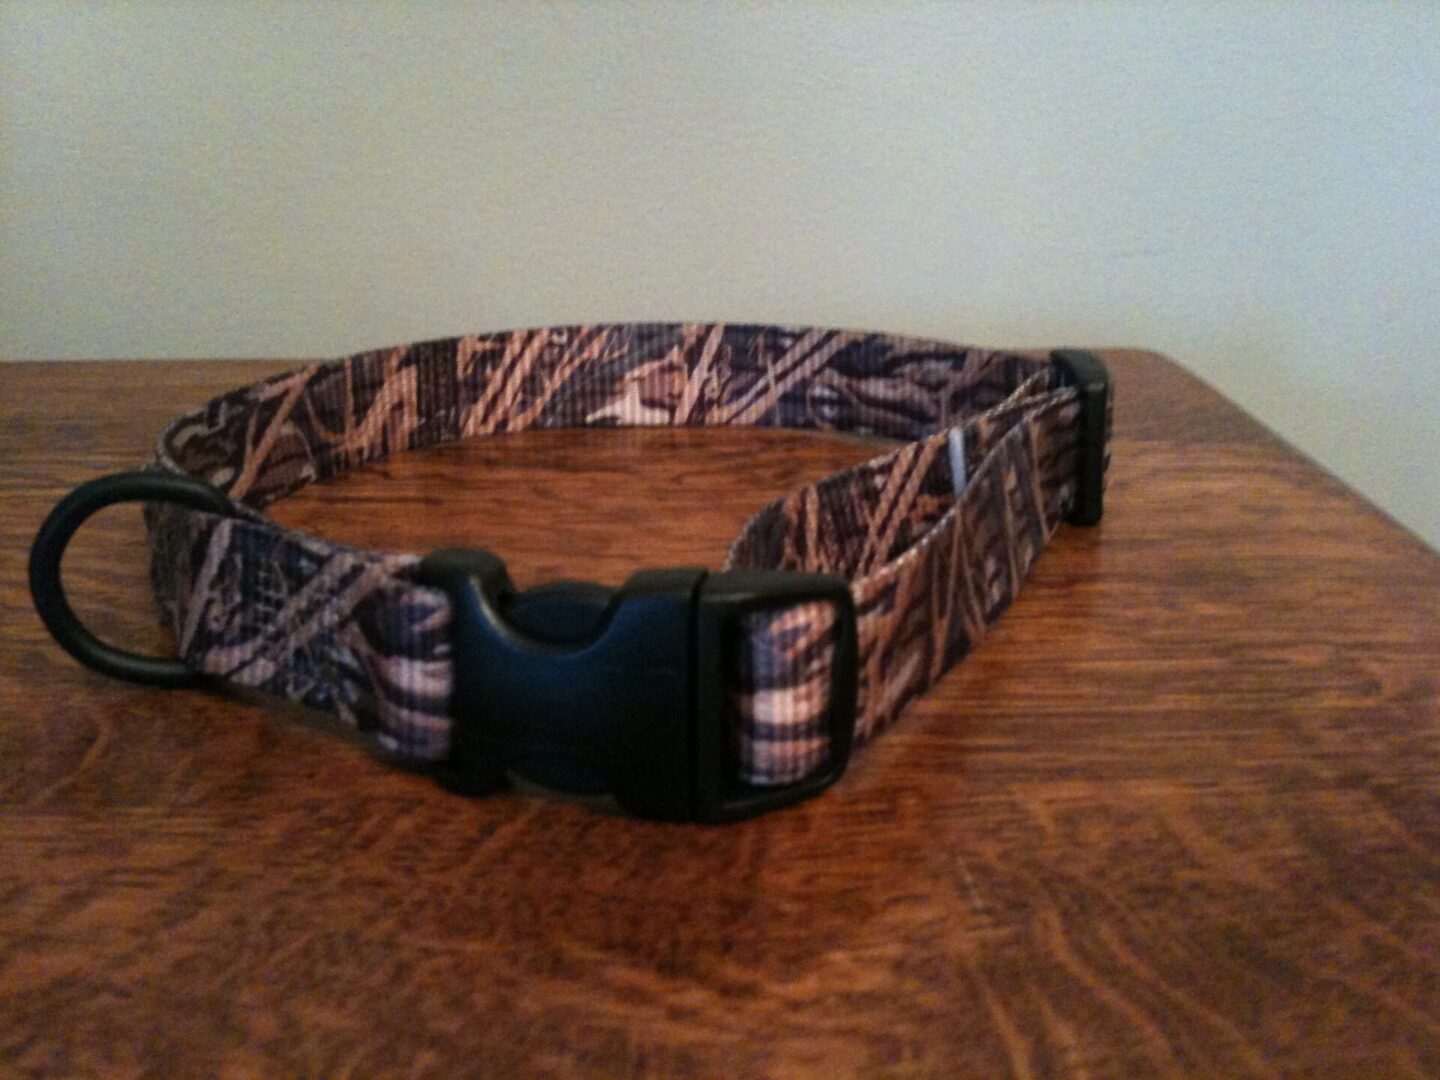 A dog collar that is sitting on top of a table.